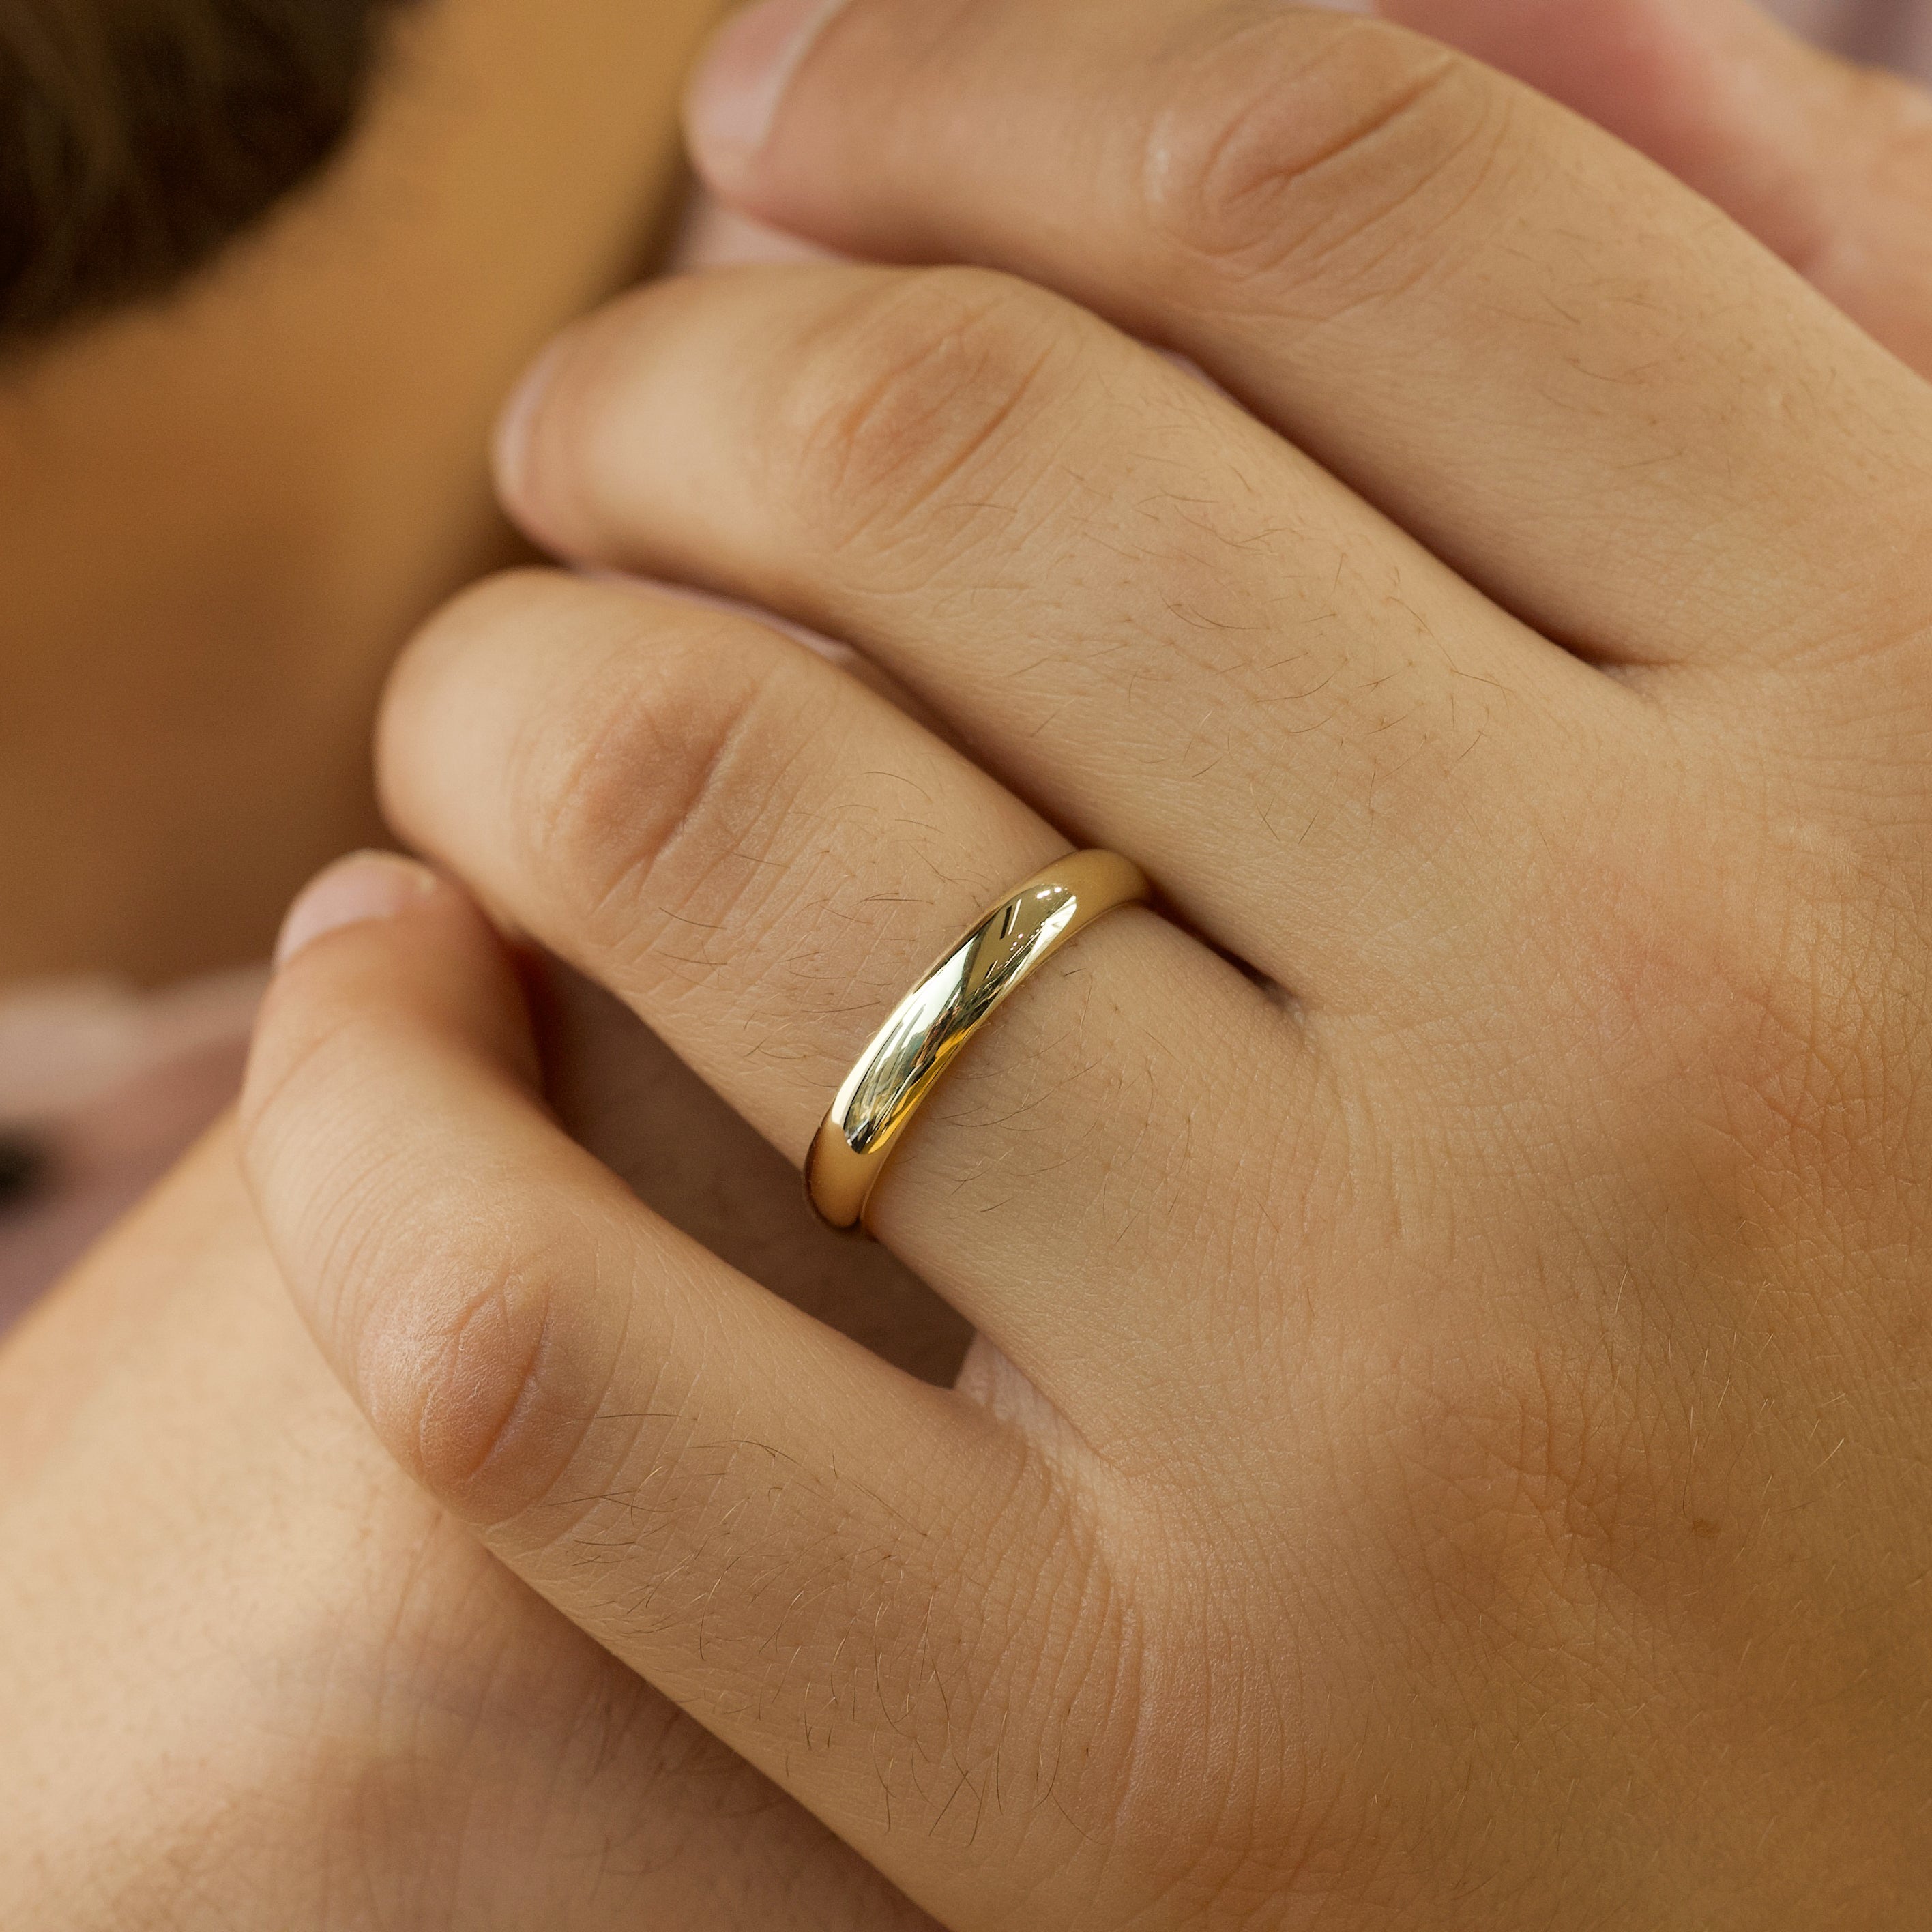 Where and When Should Men Wear Their Wedding Rings?